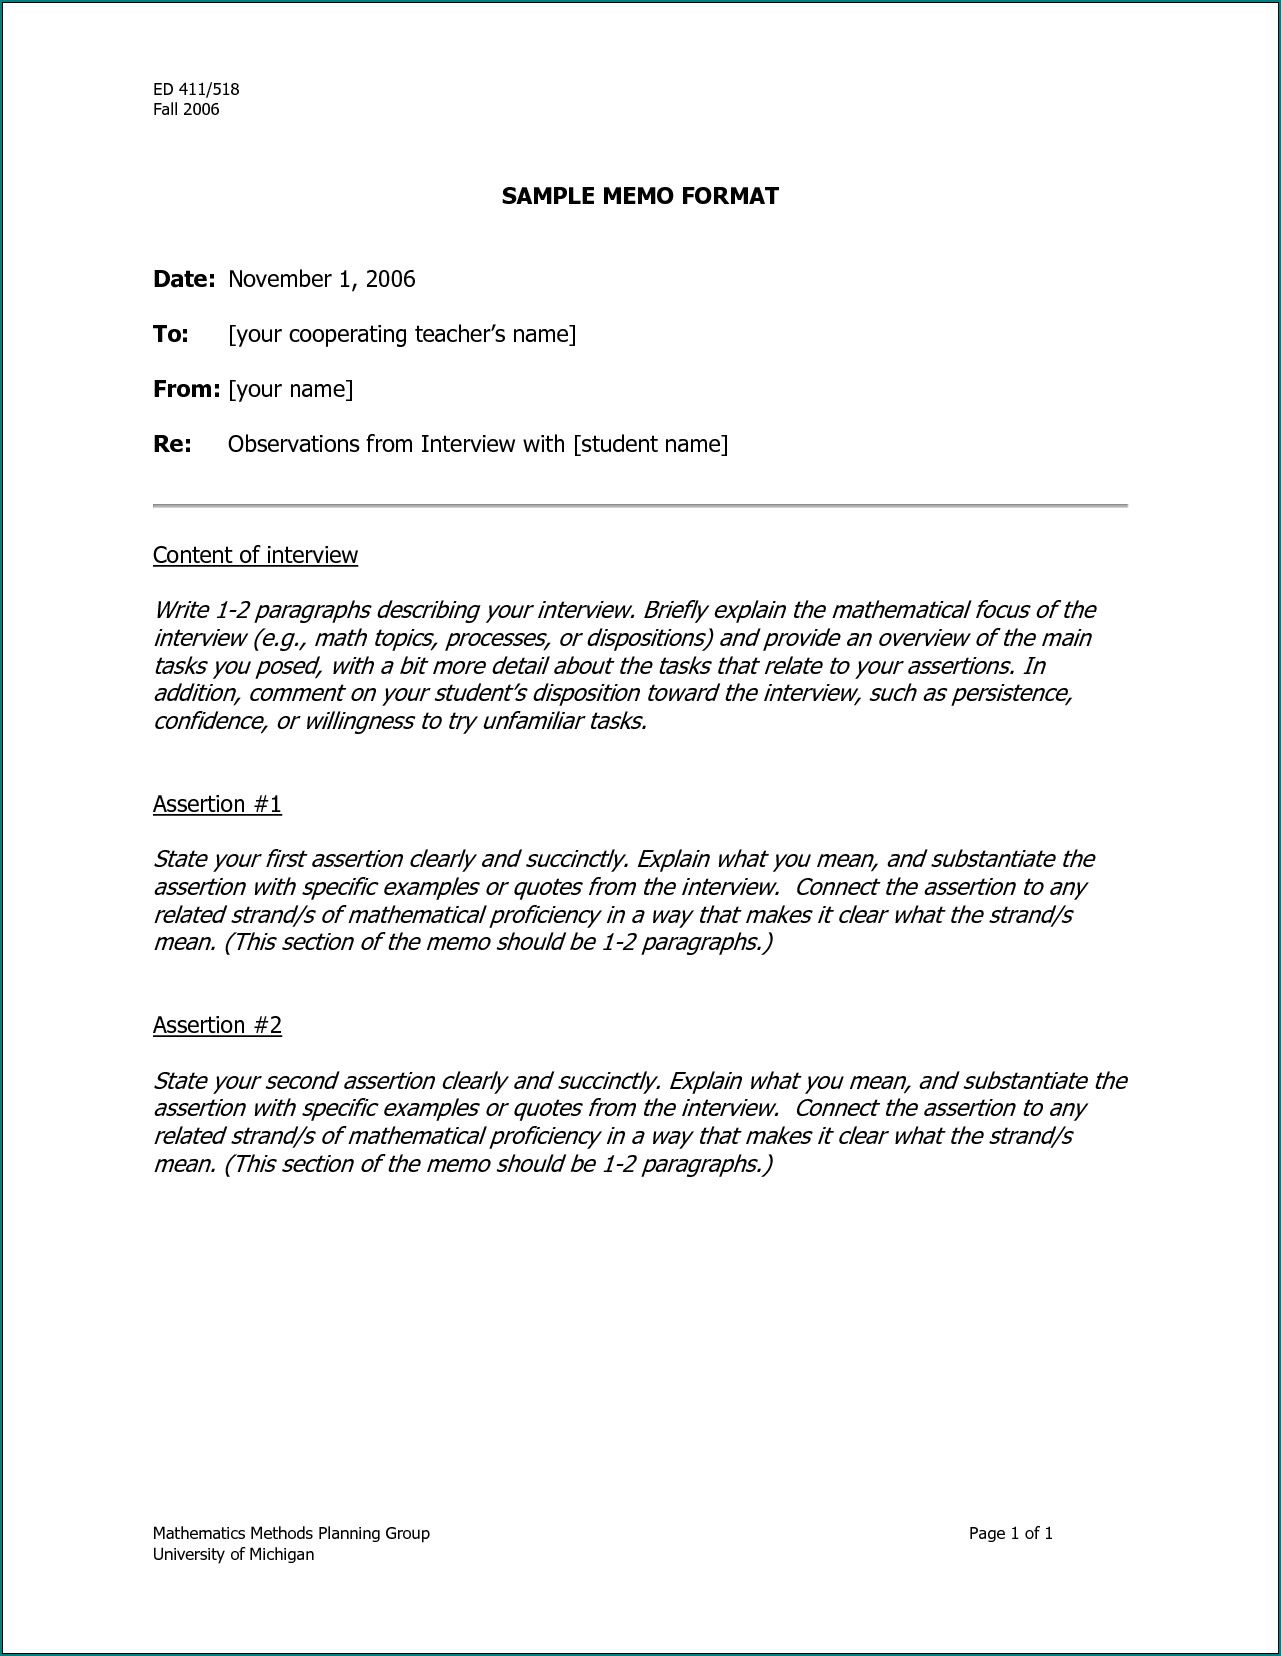 Example of Memo Format Template